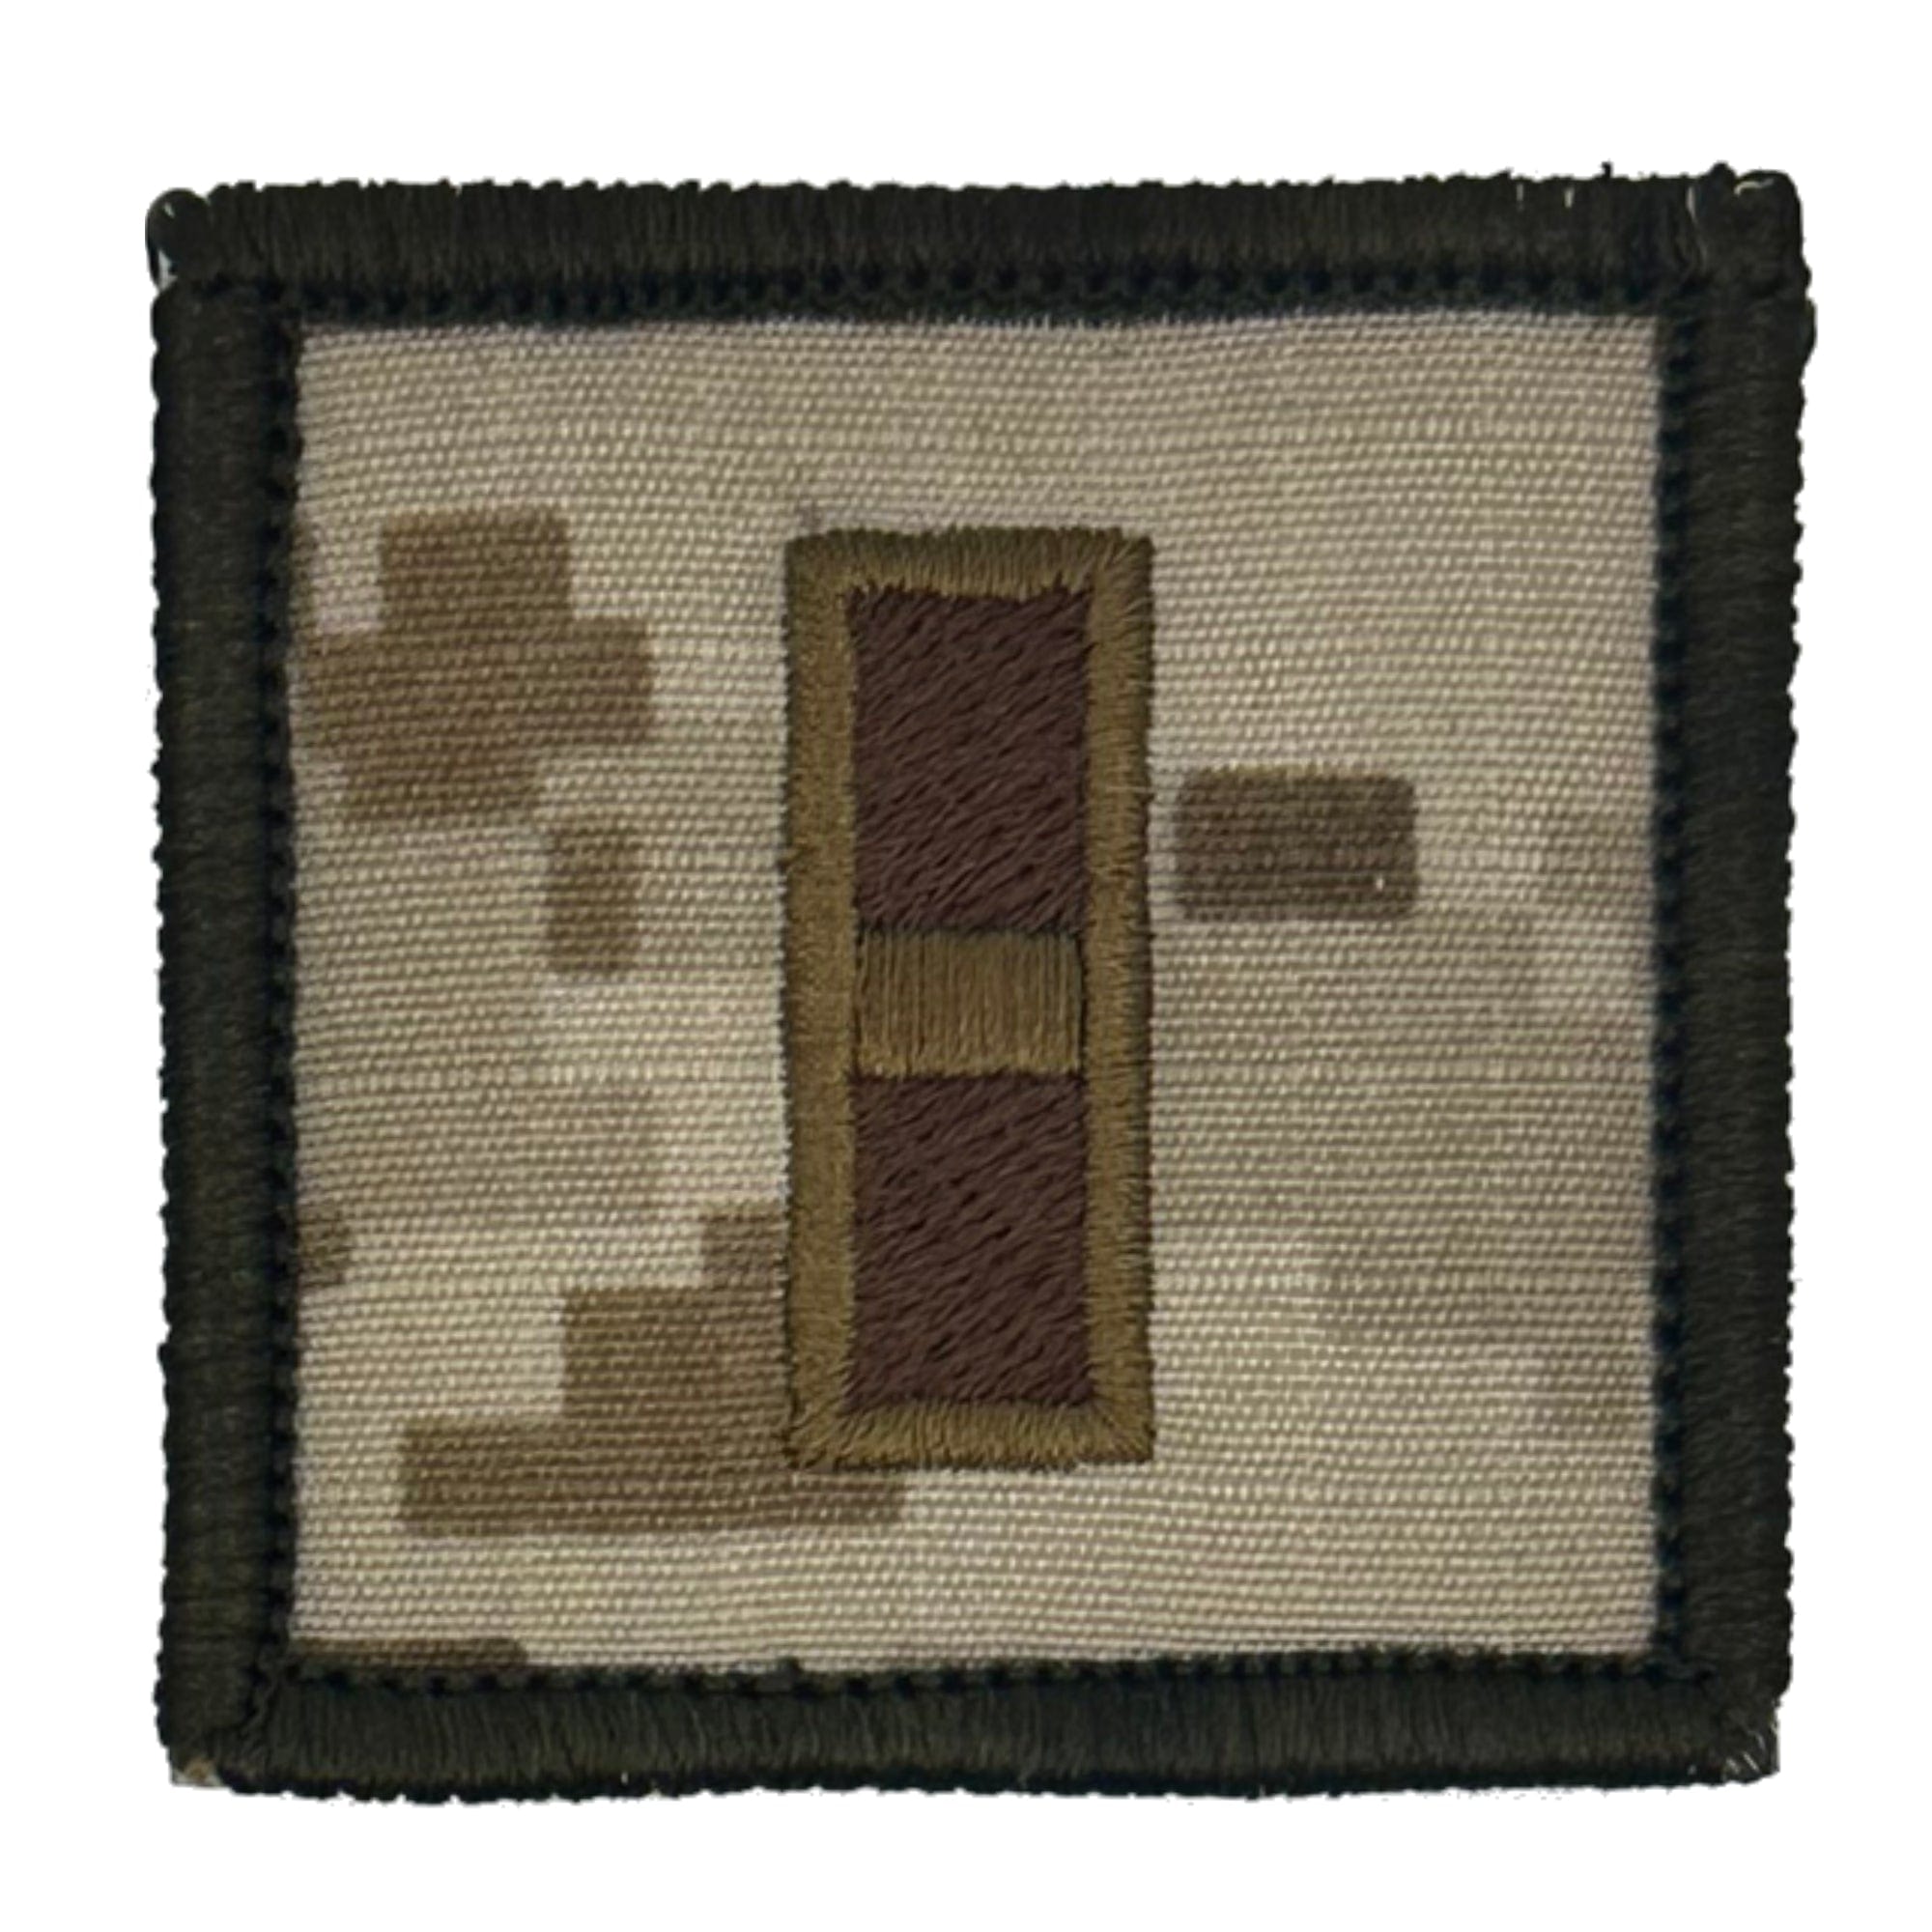 Tactical Gear Junkie Patches MARPAT Desert / Warrant Officer USMC Rank Insignia - 2x2 Patch